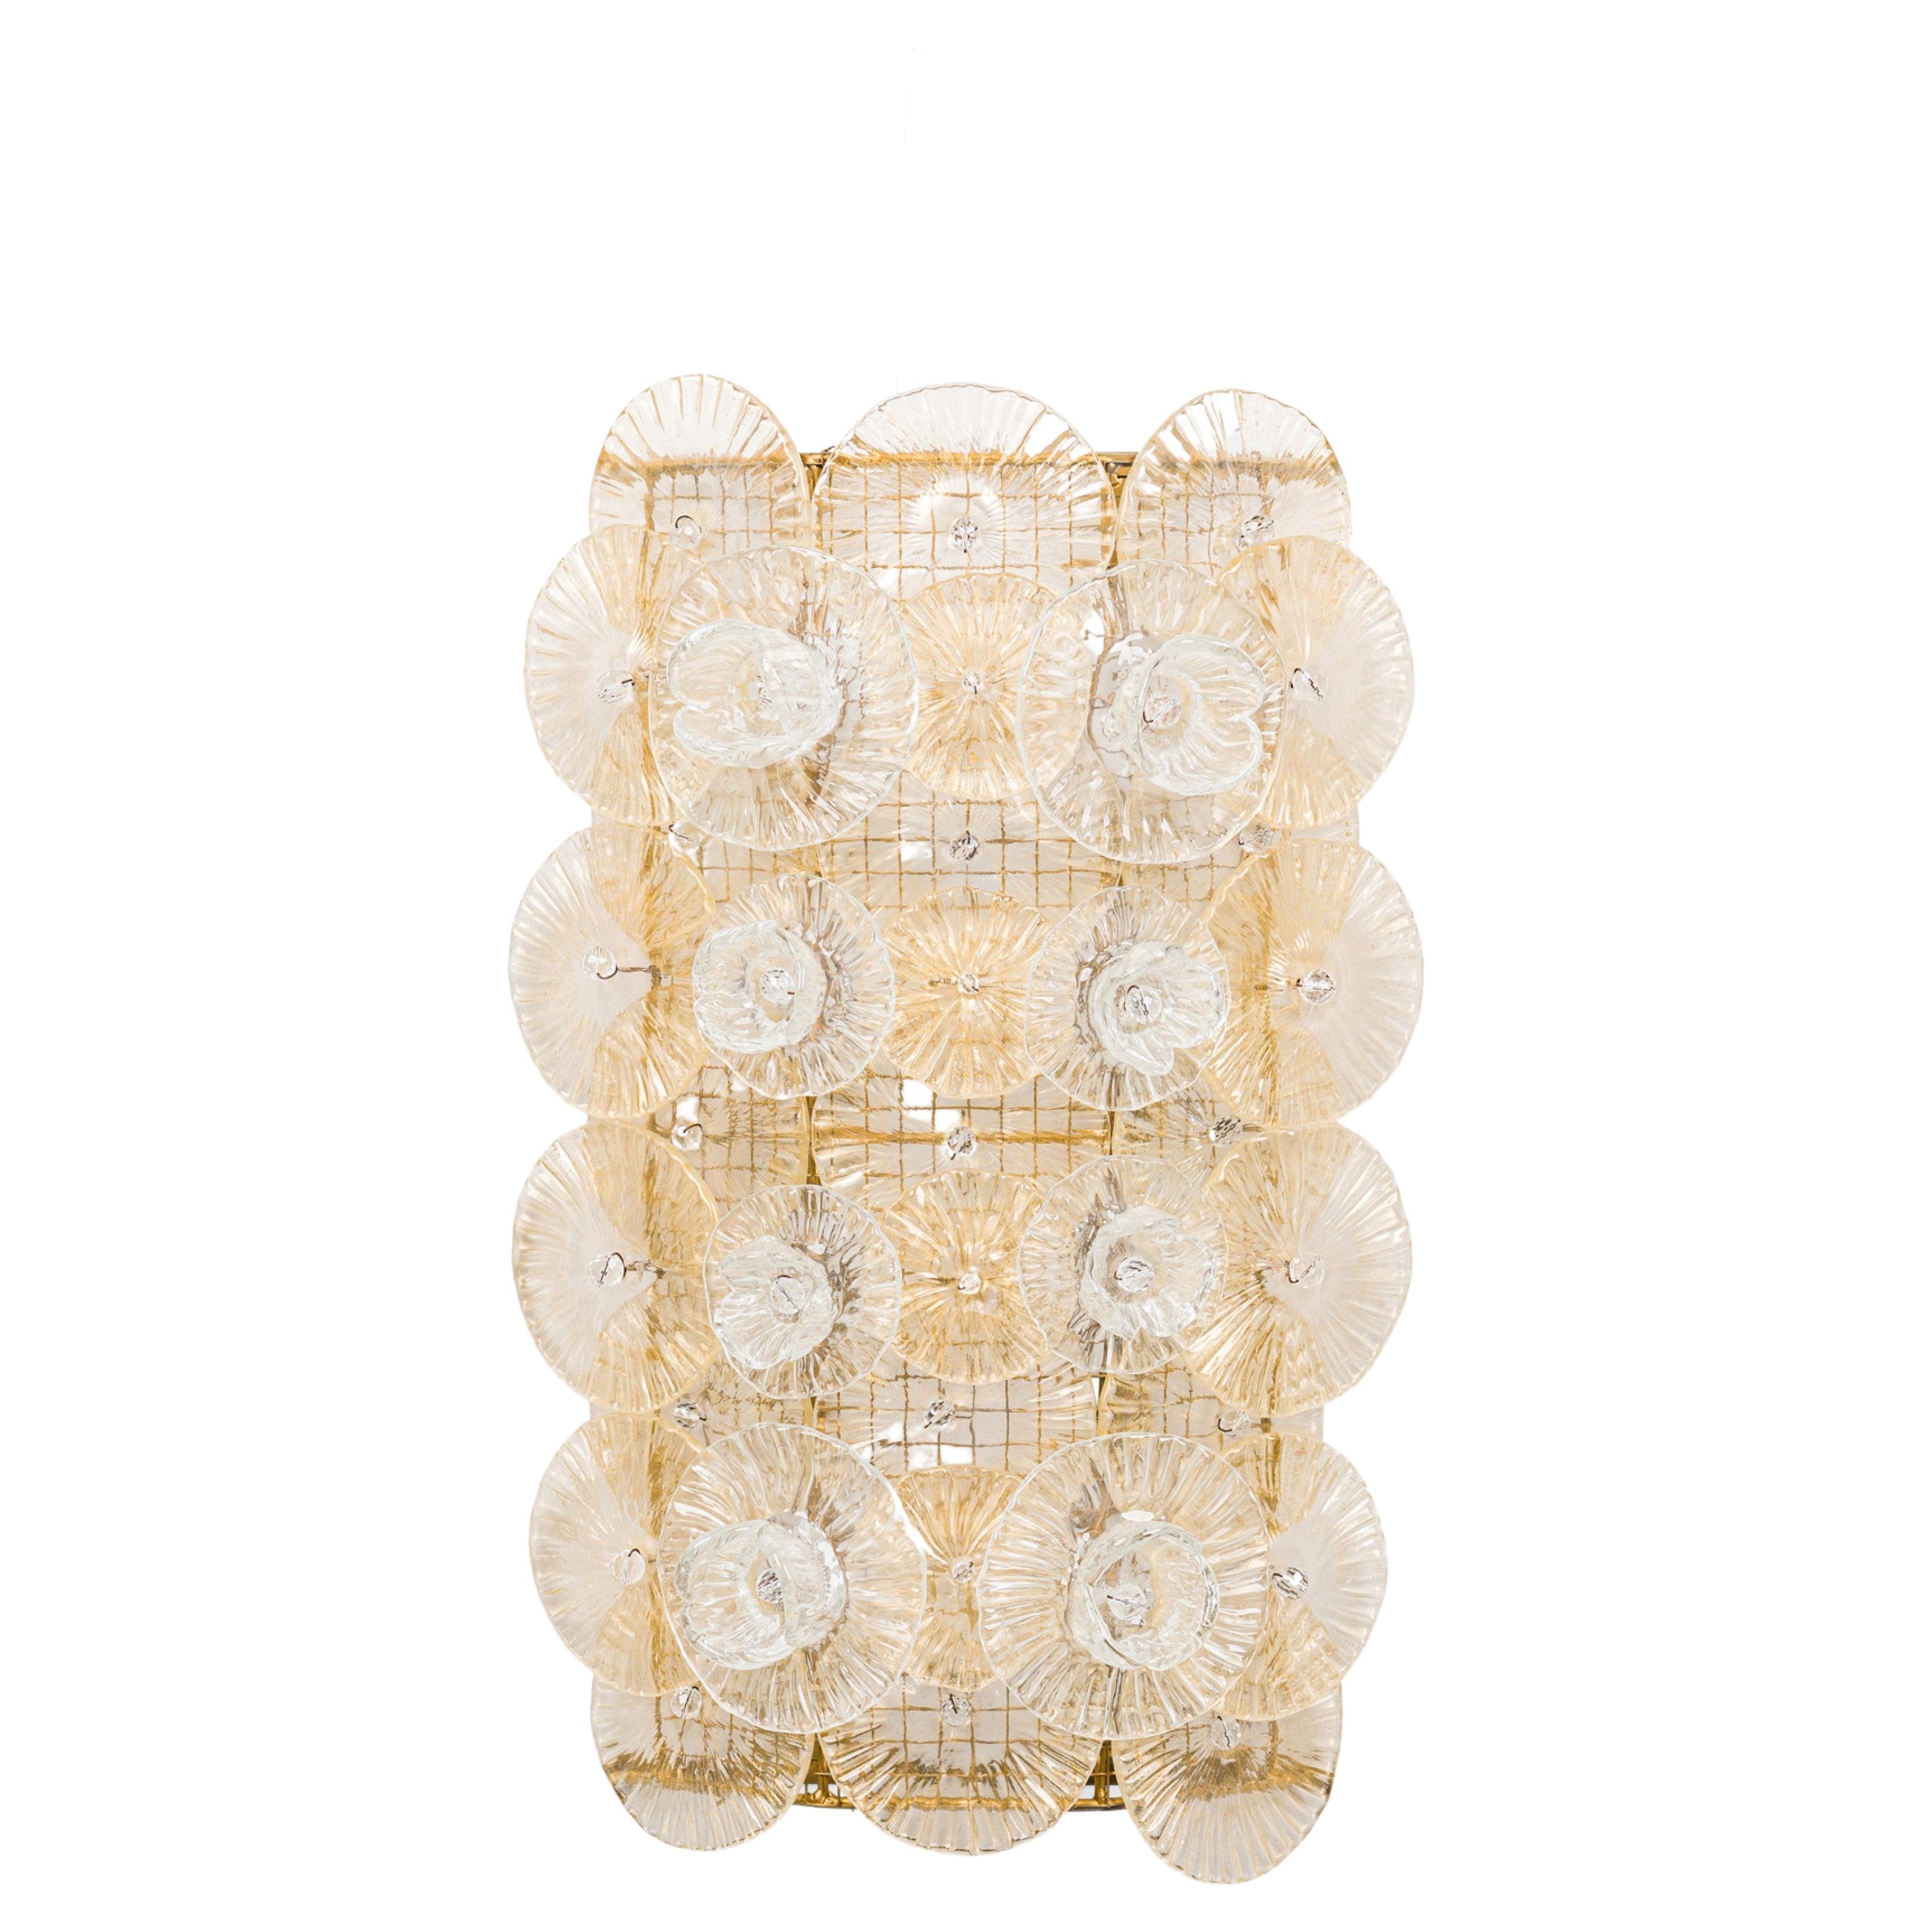 Italian Mid-Century Flower Murano Glass Wall Sconce For Sale